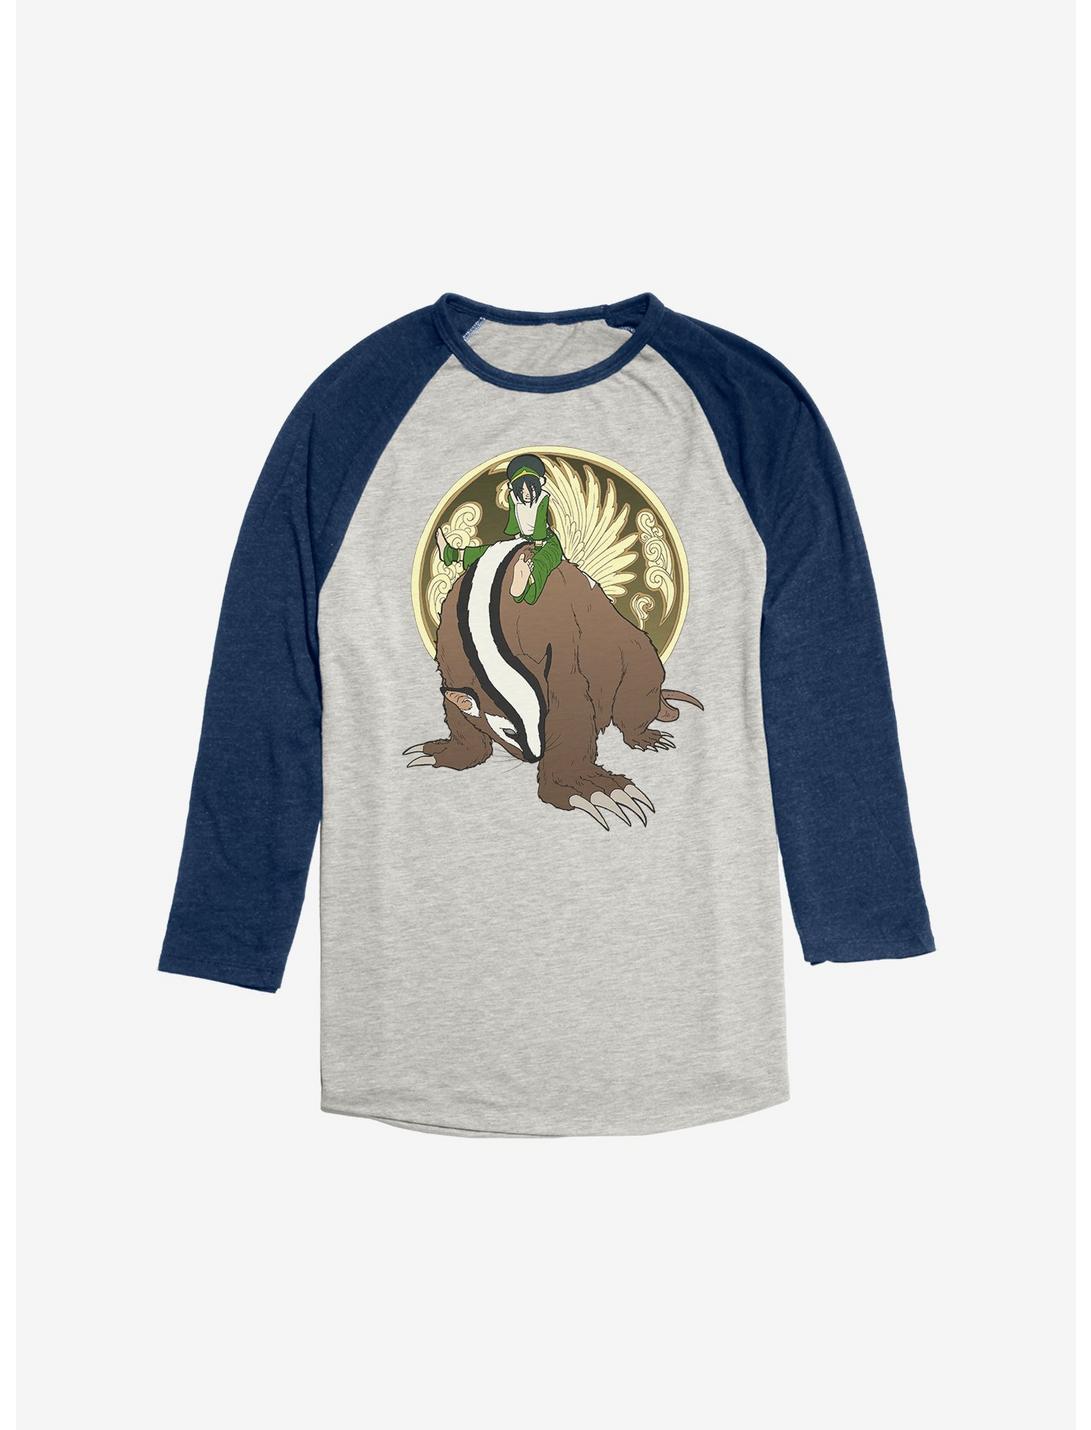 Avatar: The Last Airbender Toph And The Badgermole Raglan, Oatmeal With Navy, hi-res